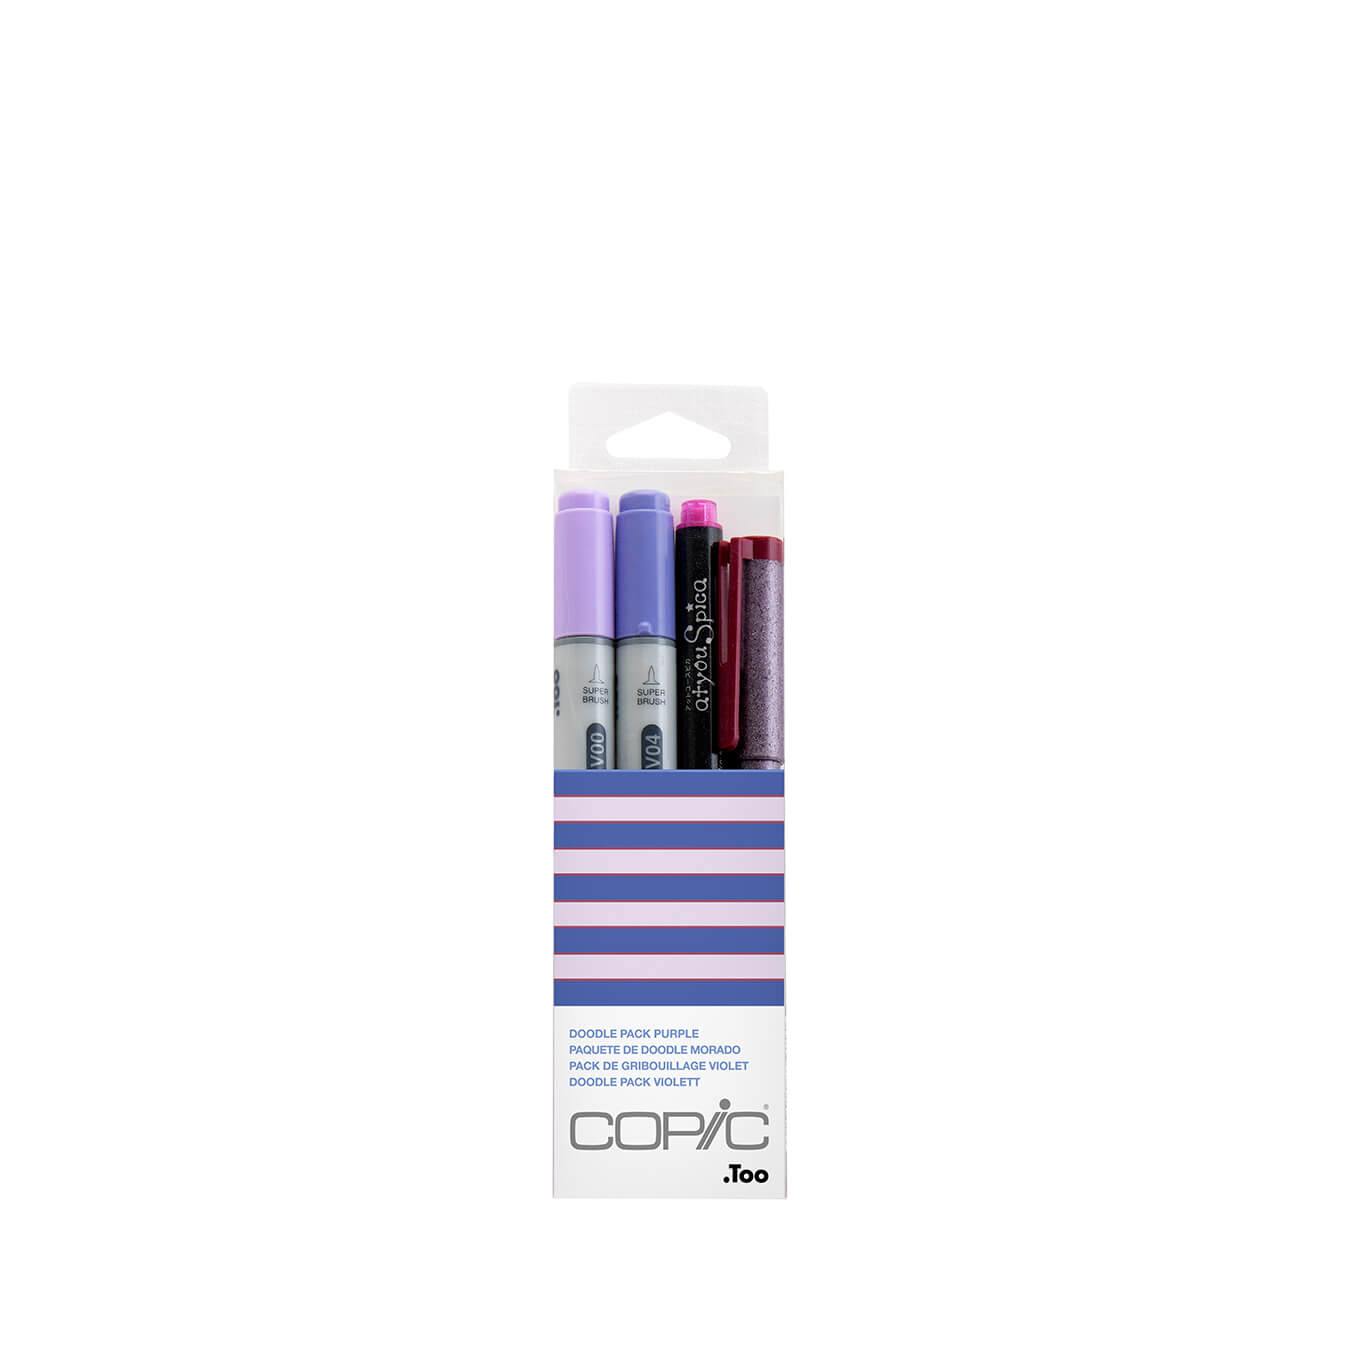 Copic Ciao Doodle pack Purple